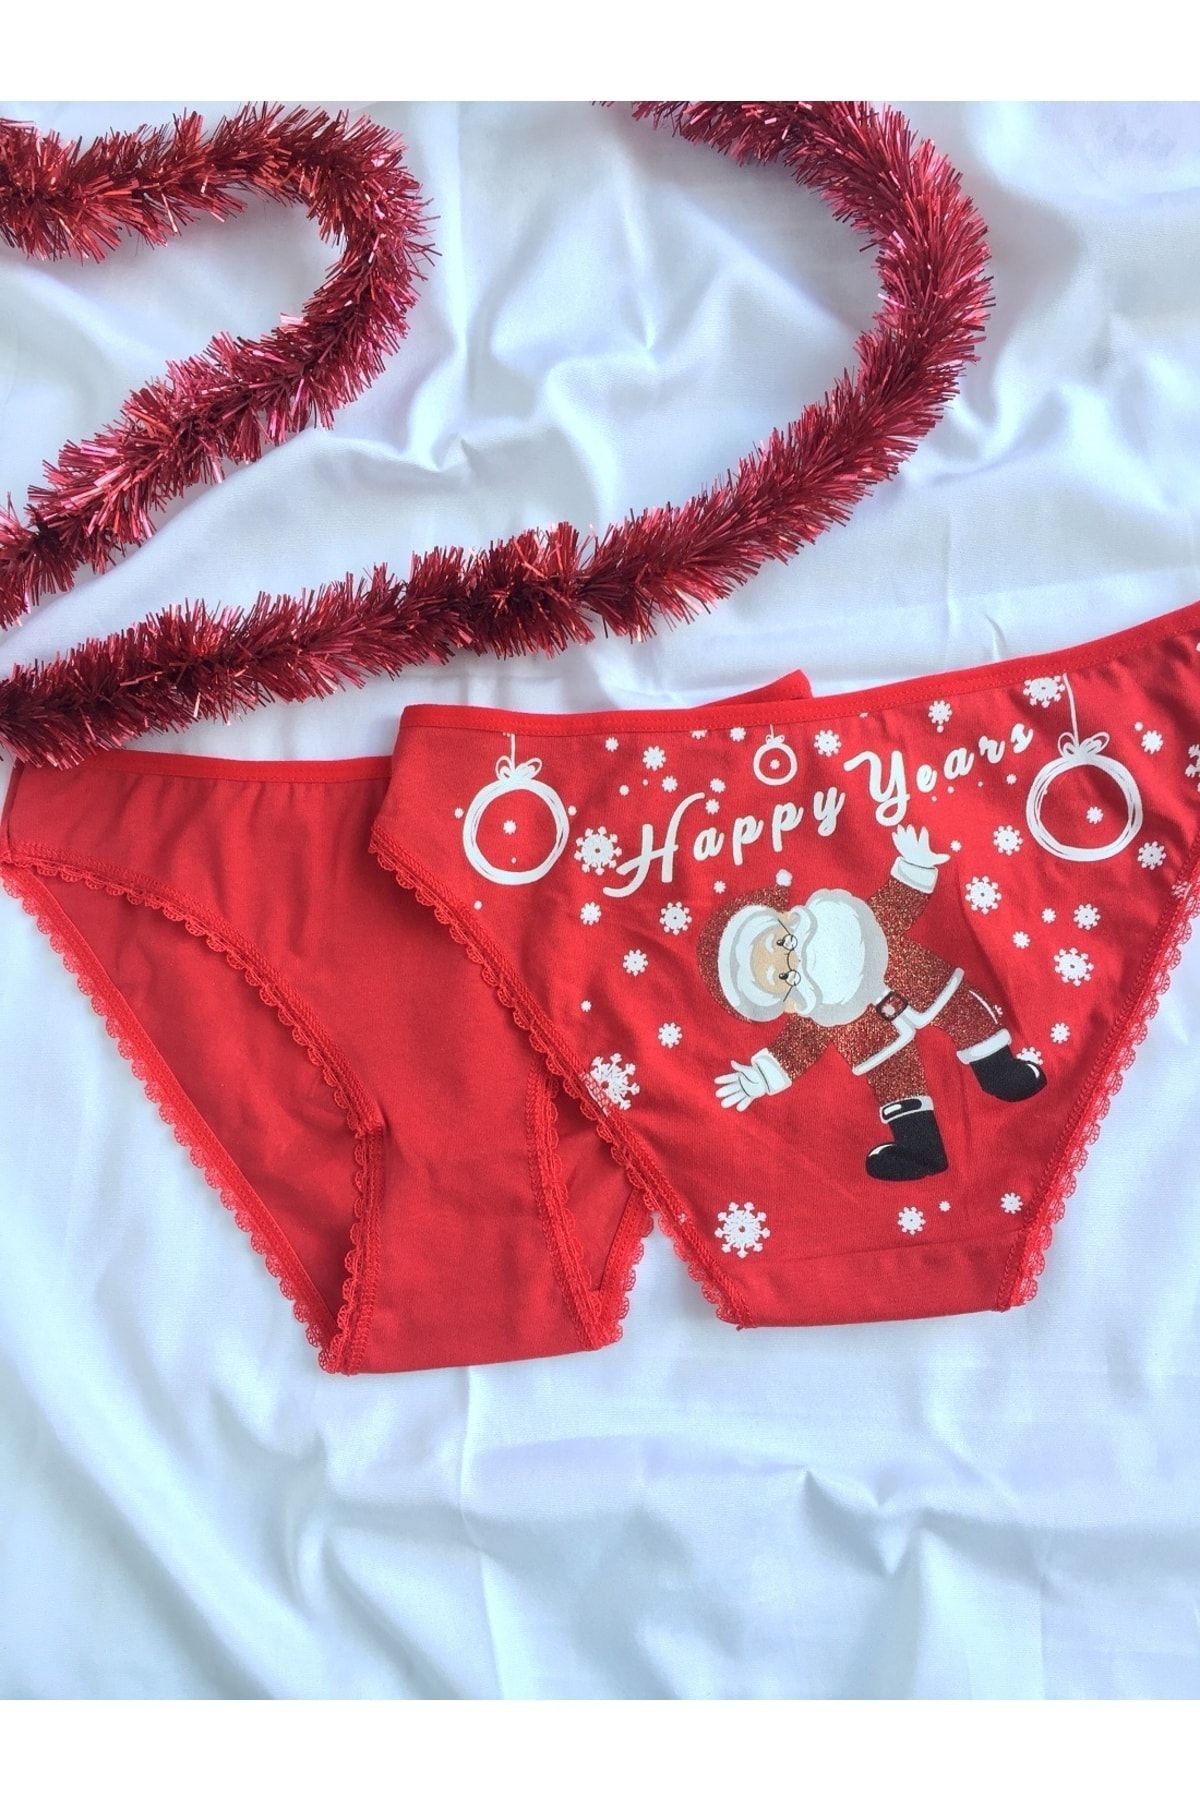 Christmas Red Panties.Underwear Red Lingerie. Happy New Year